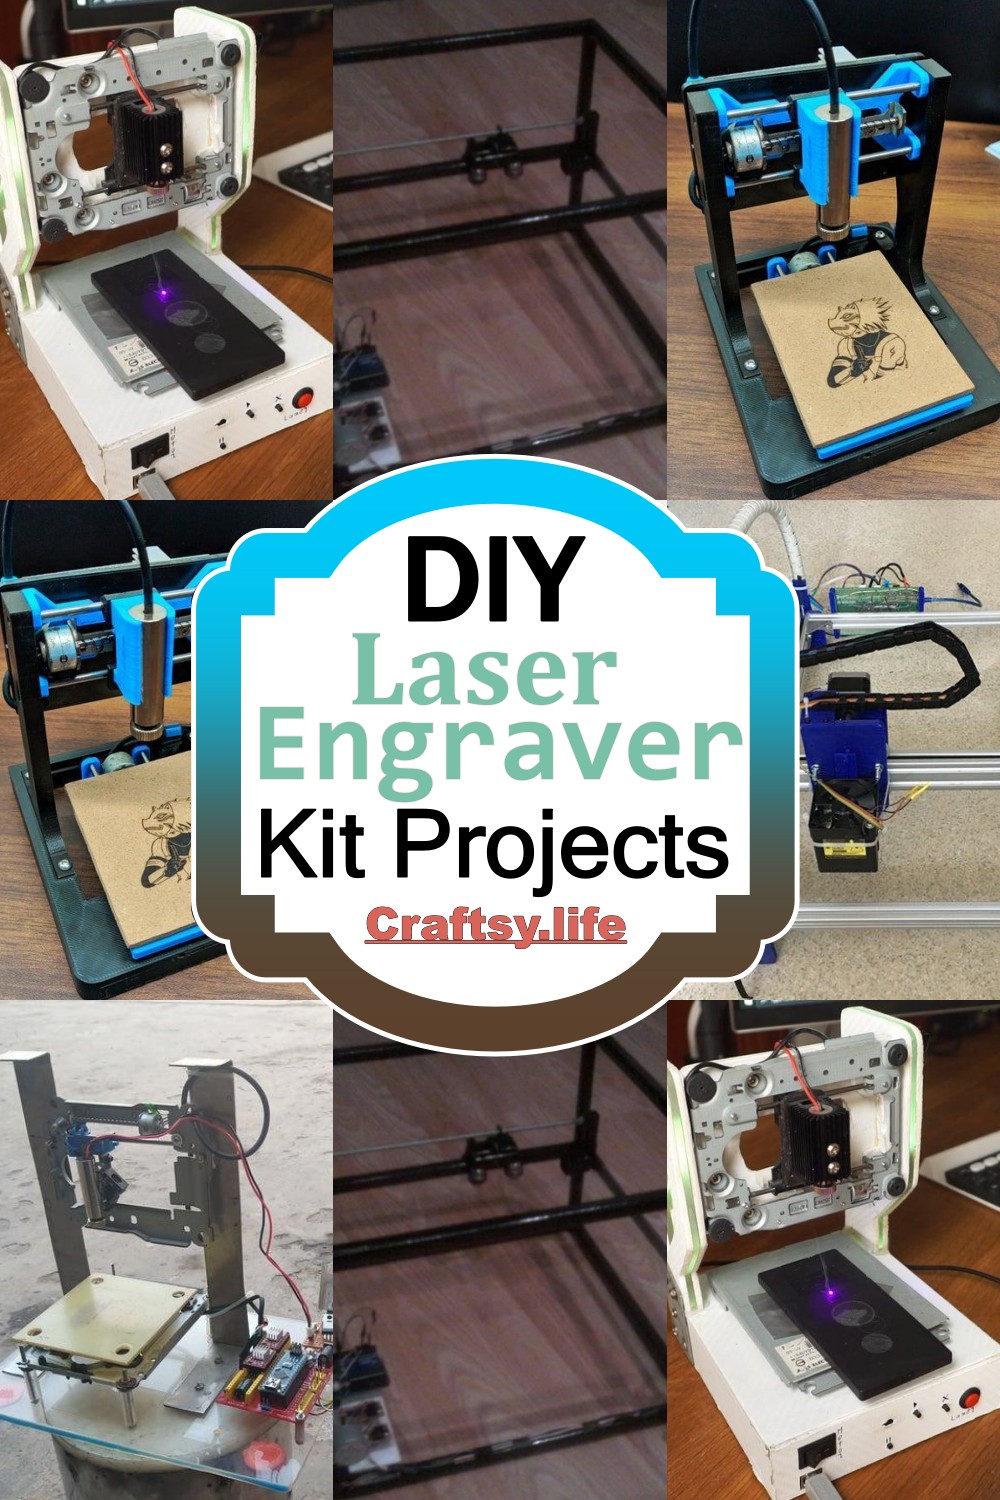 Laser Engraver Kit Projects